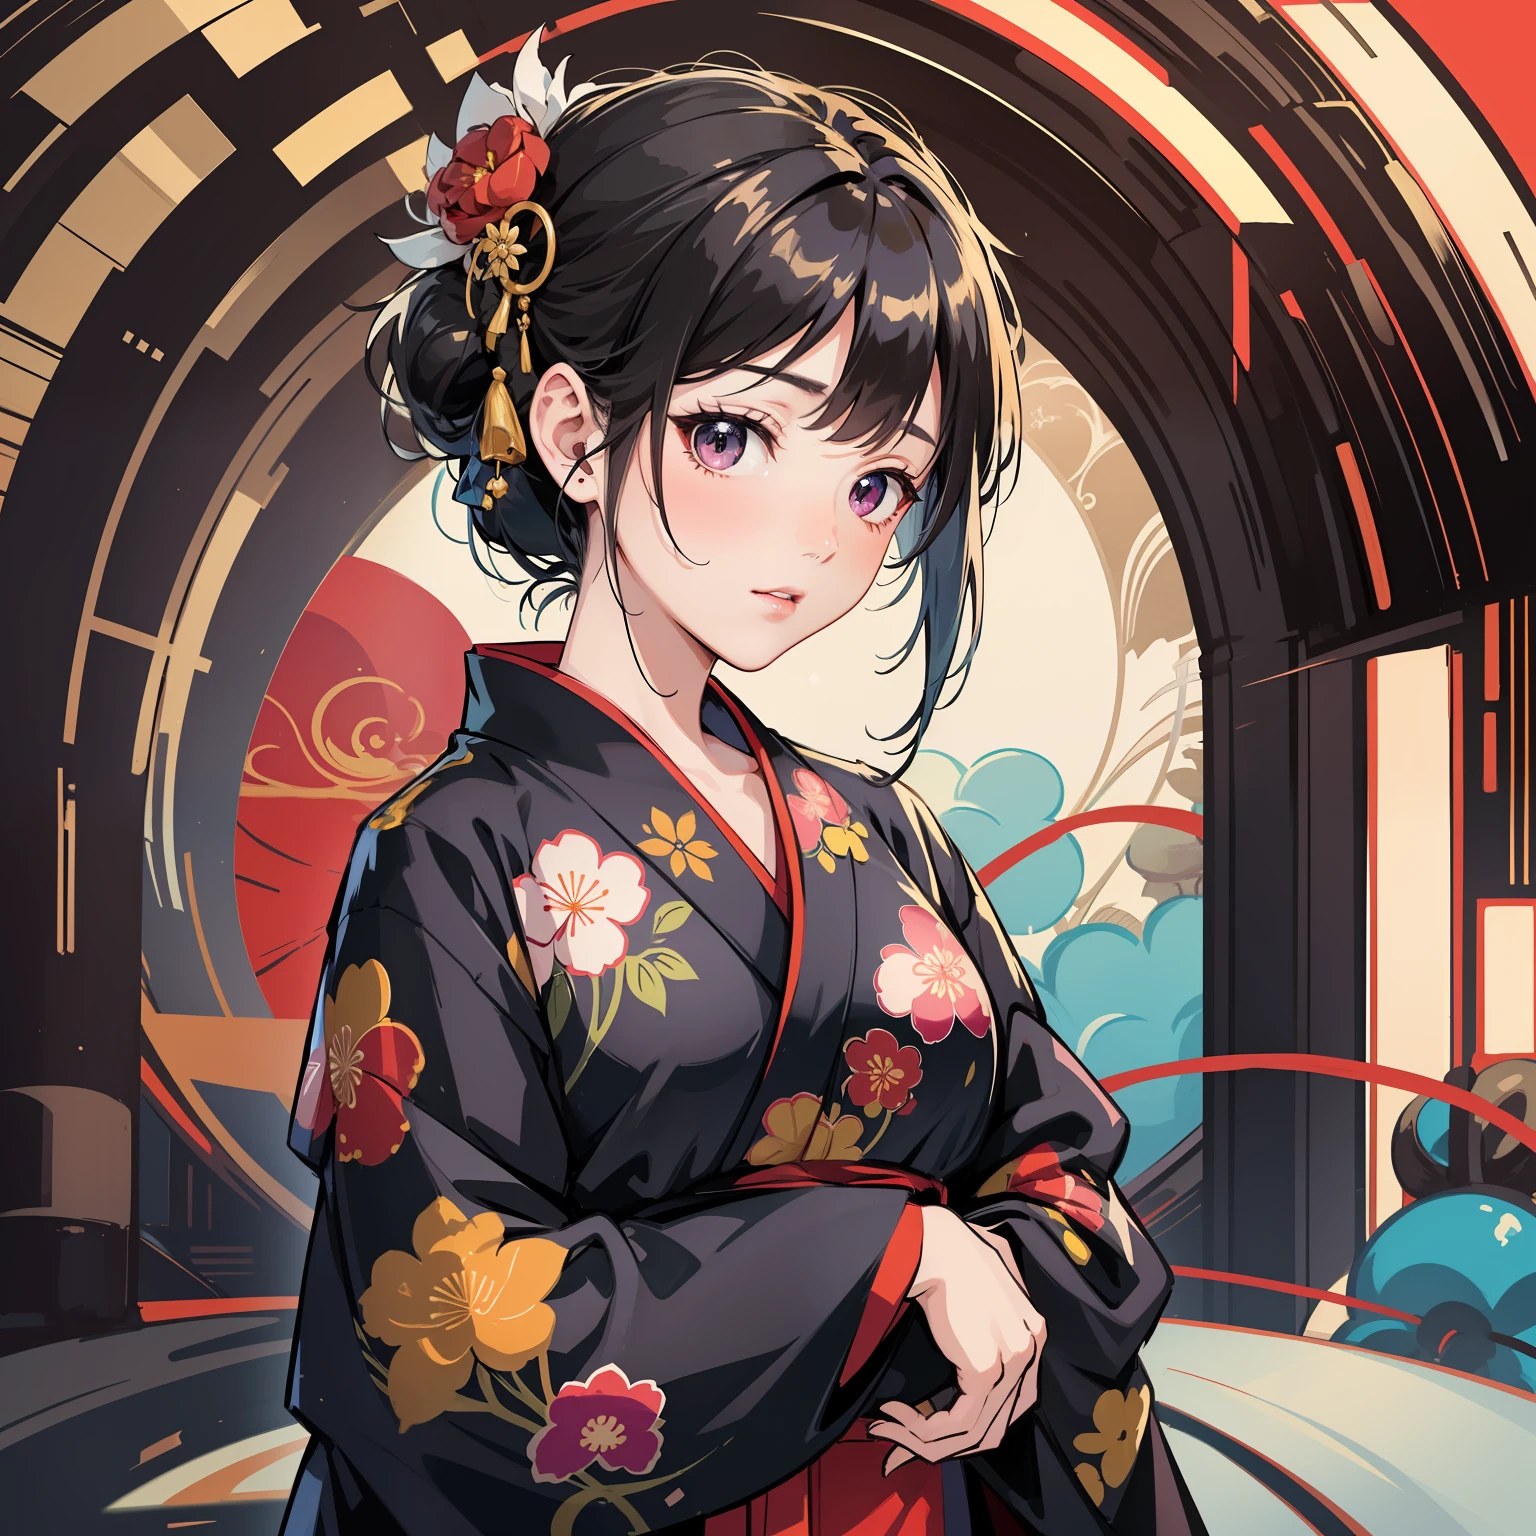 Please make Japan Taisho era girls the main、High quality and detail、In an anime style、Seriousness 100％、Technical Capabilities 100％serve、Cute, delicate and dynamic